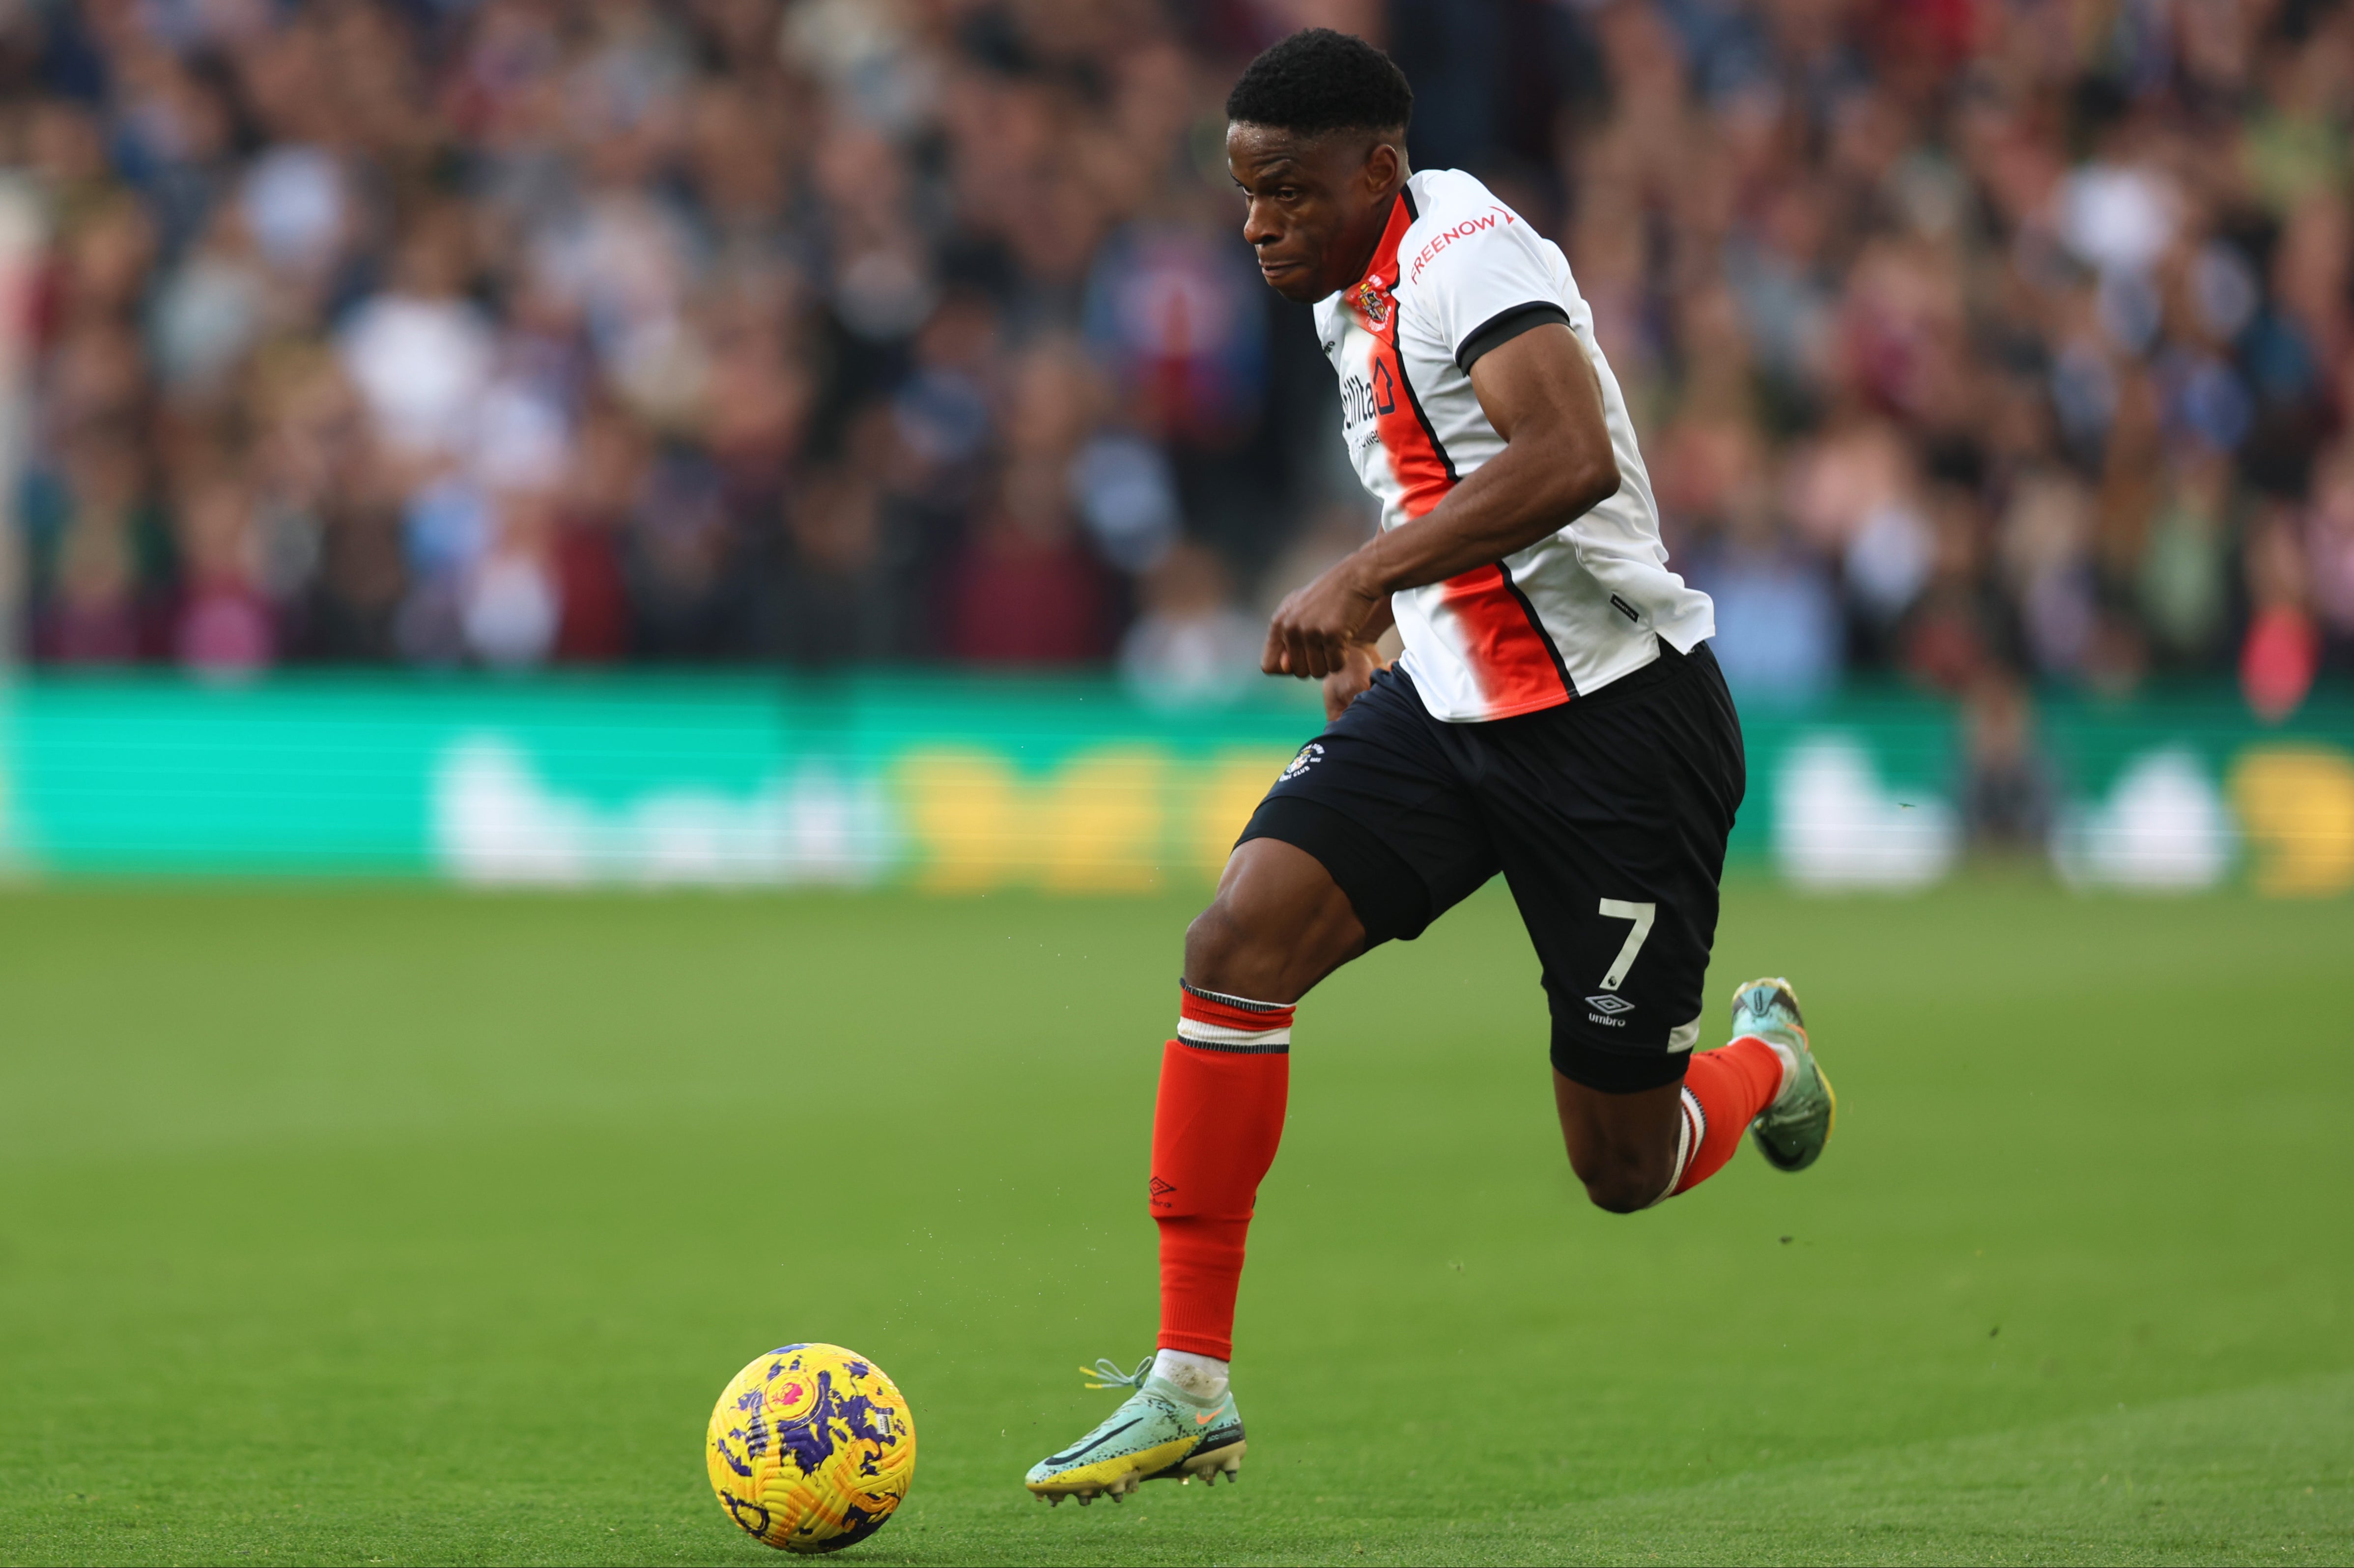 Chiedozie Ogbene has recorded the fastest sprint speed in the Premier League this season